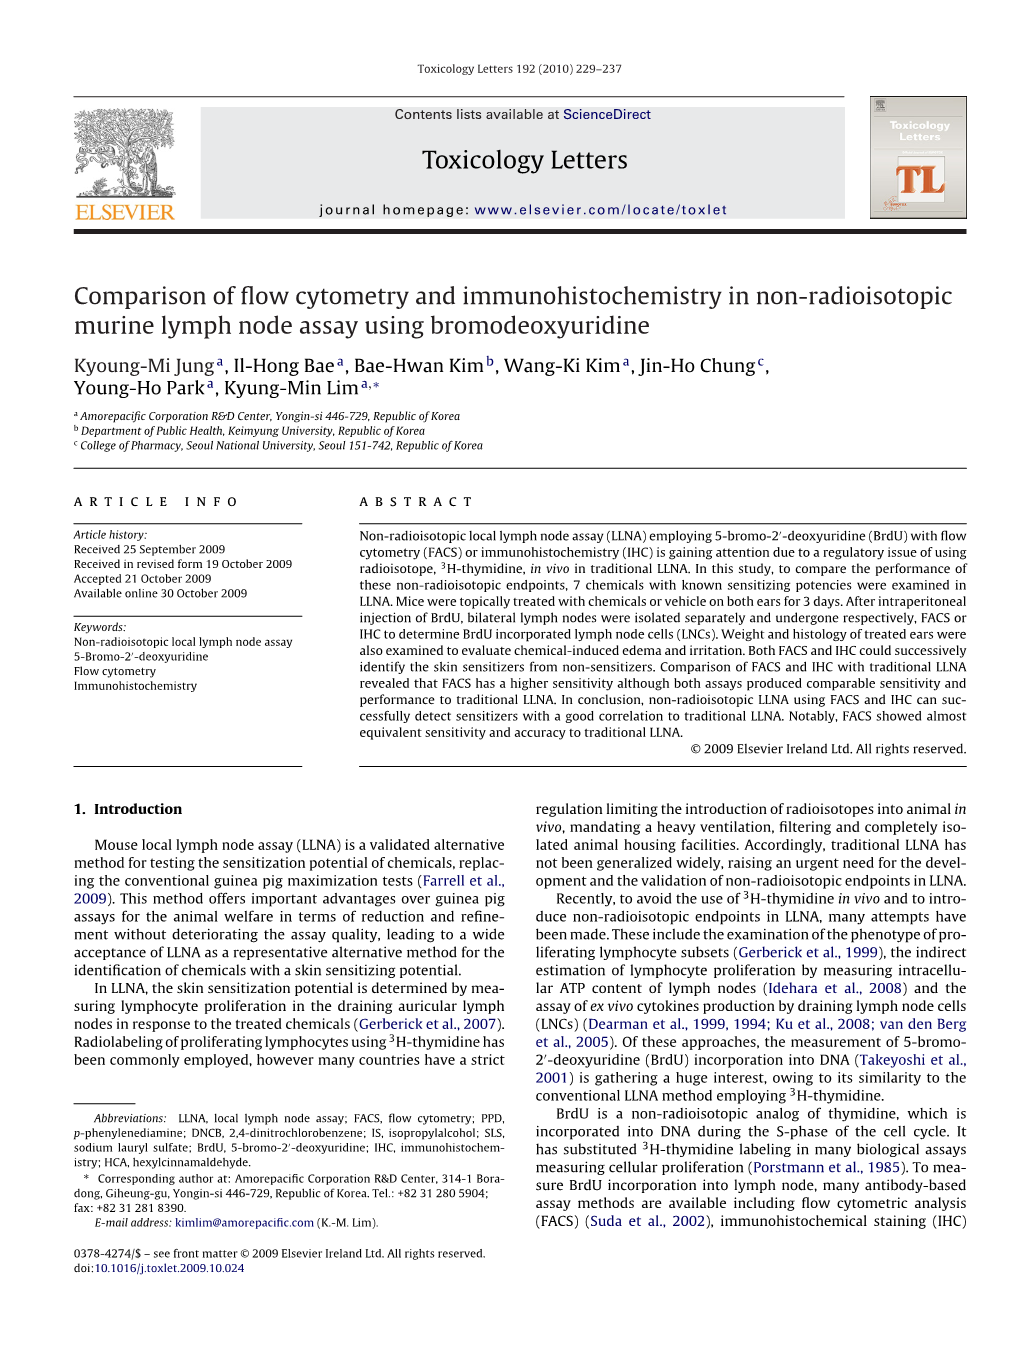 Toxicology Letters Comparison of Flow Cytometry And